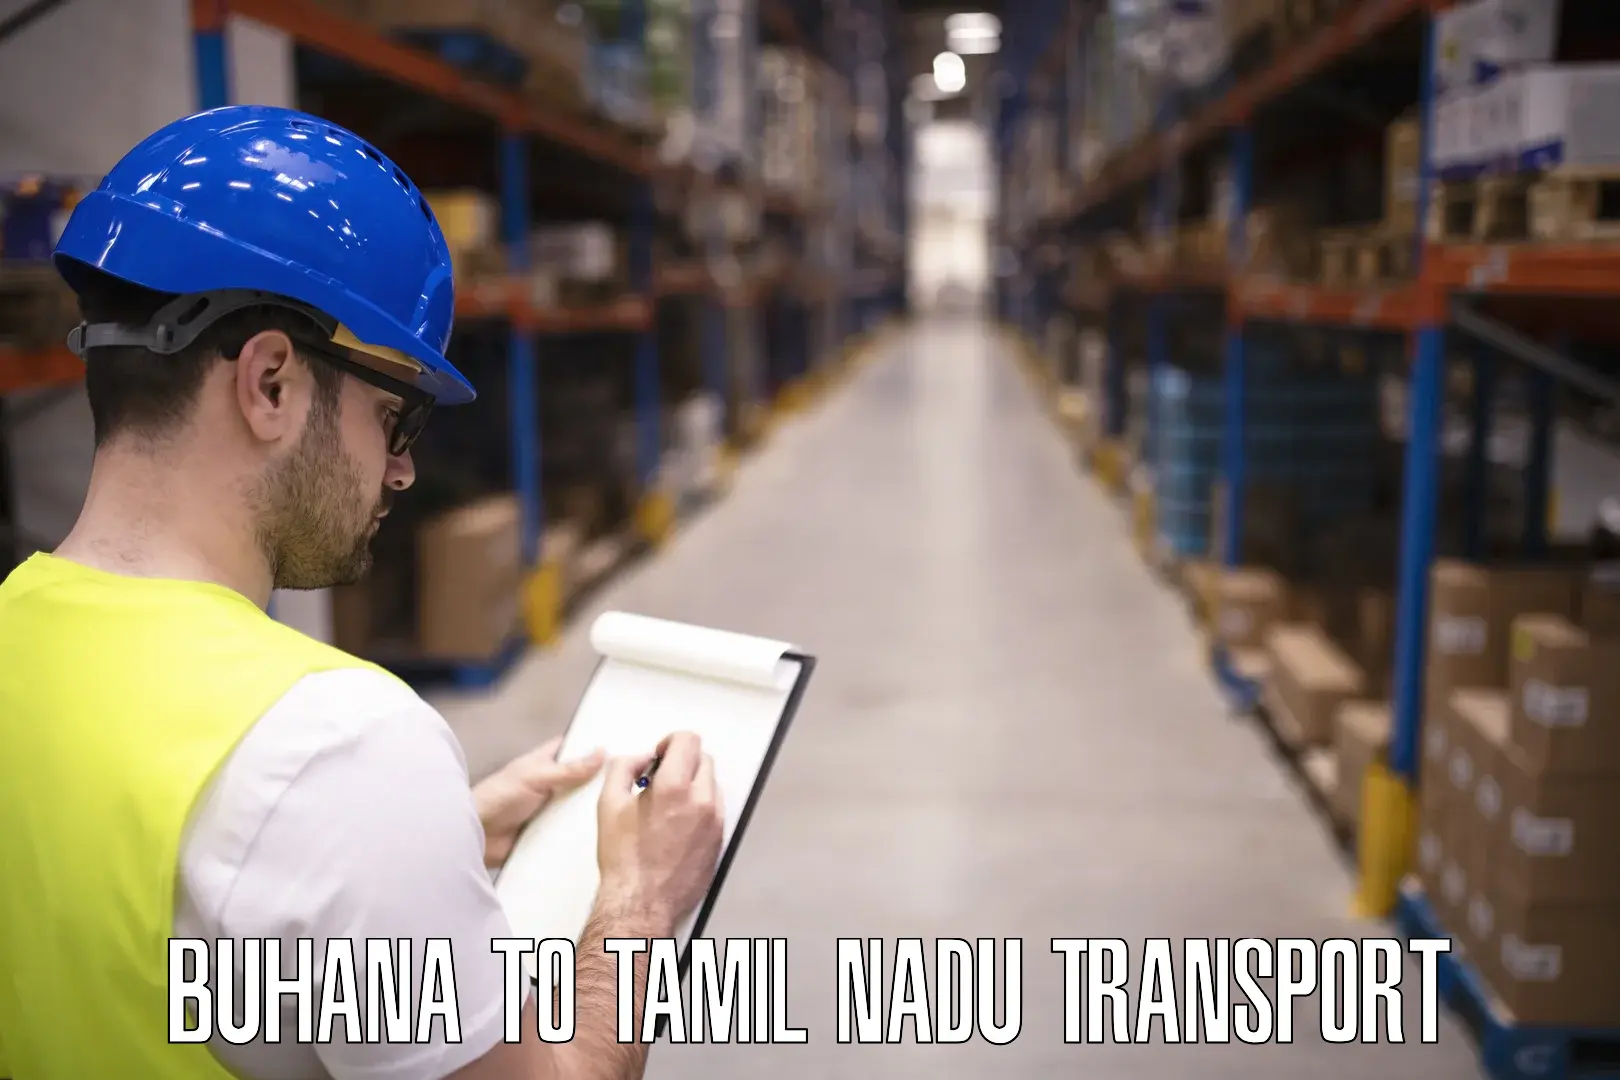 Air freight transport services in Buhana to Tamil Nadu